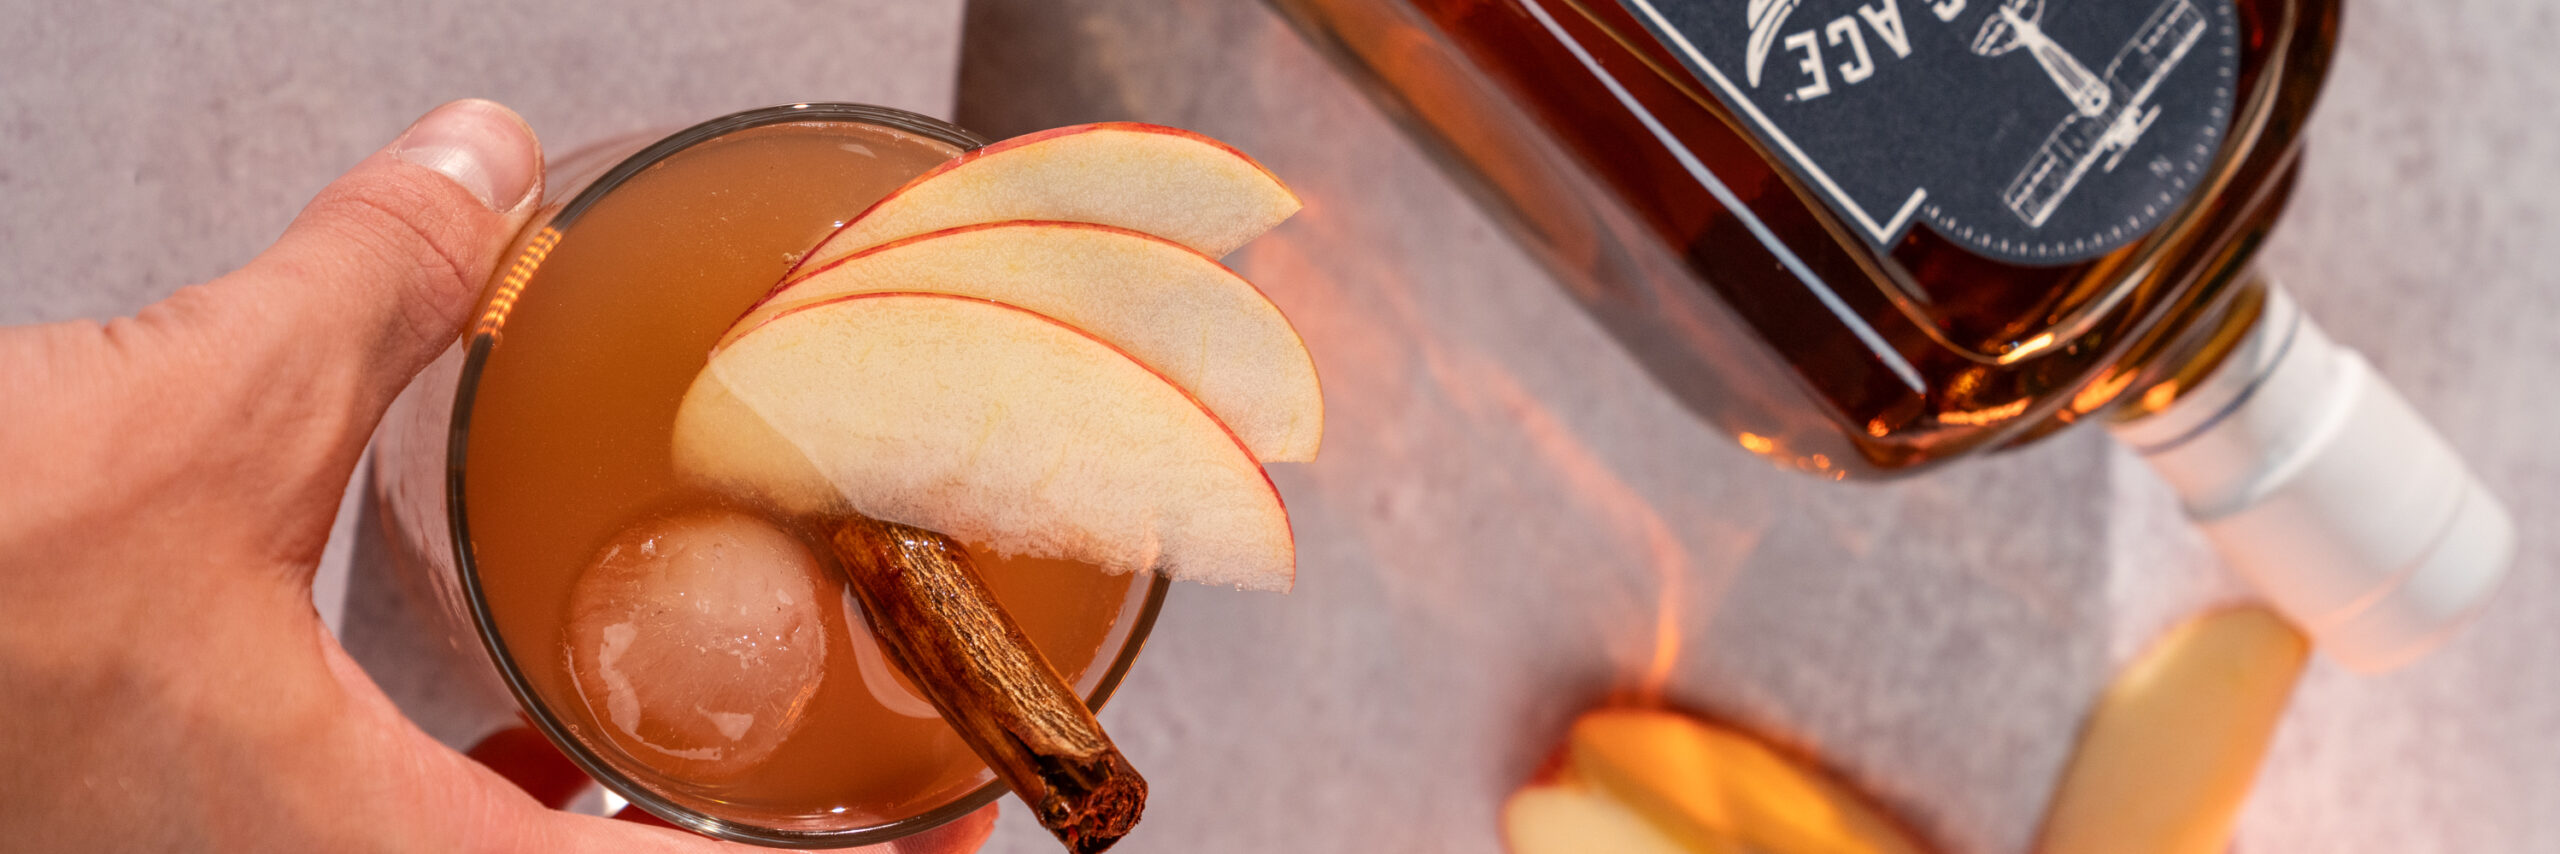 best mixers for bourbon, bourbon mixers, hand setting cocktail with apple slices down on table